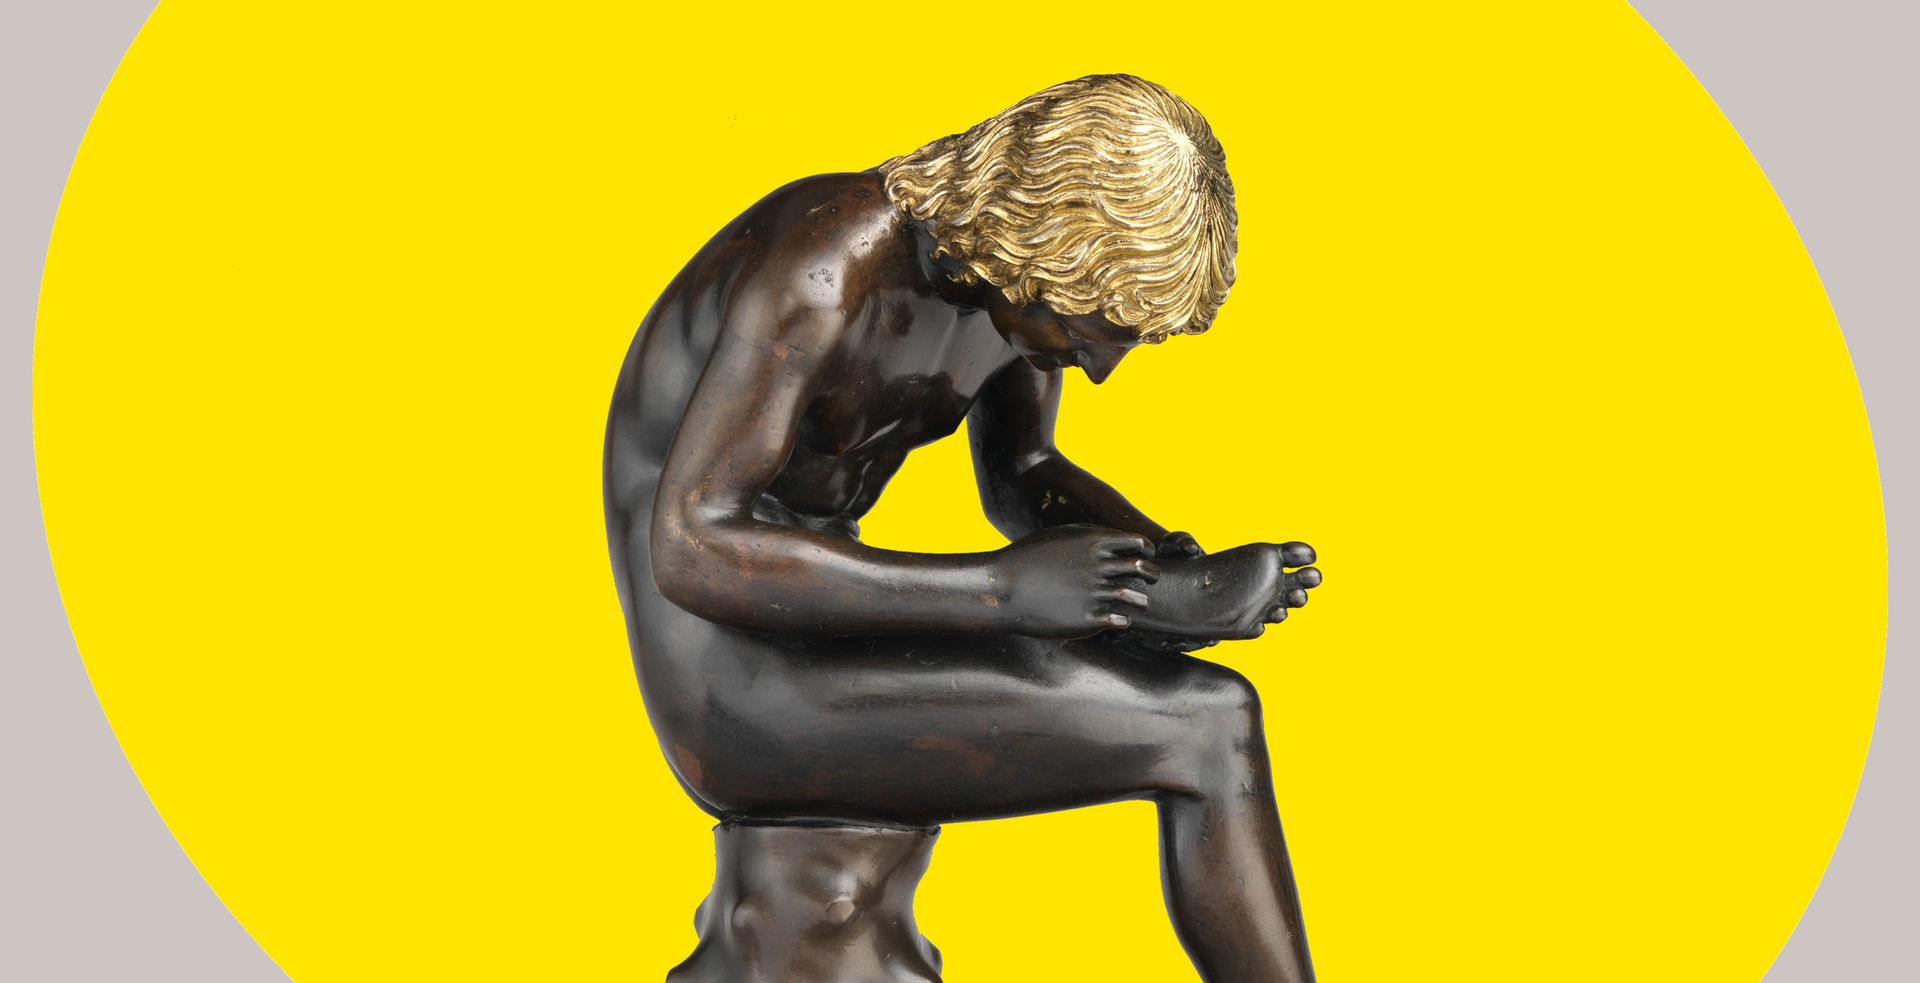 A small bronze sculpture of a seated boy pulling a thorn from the bottom of his foot appears set against a bright yellow ovular spotlight shape in the background.